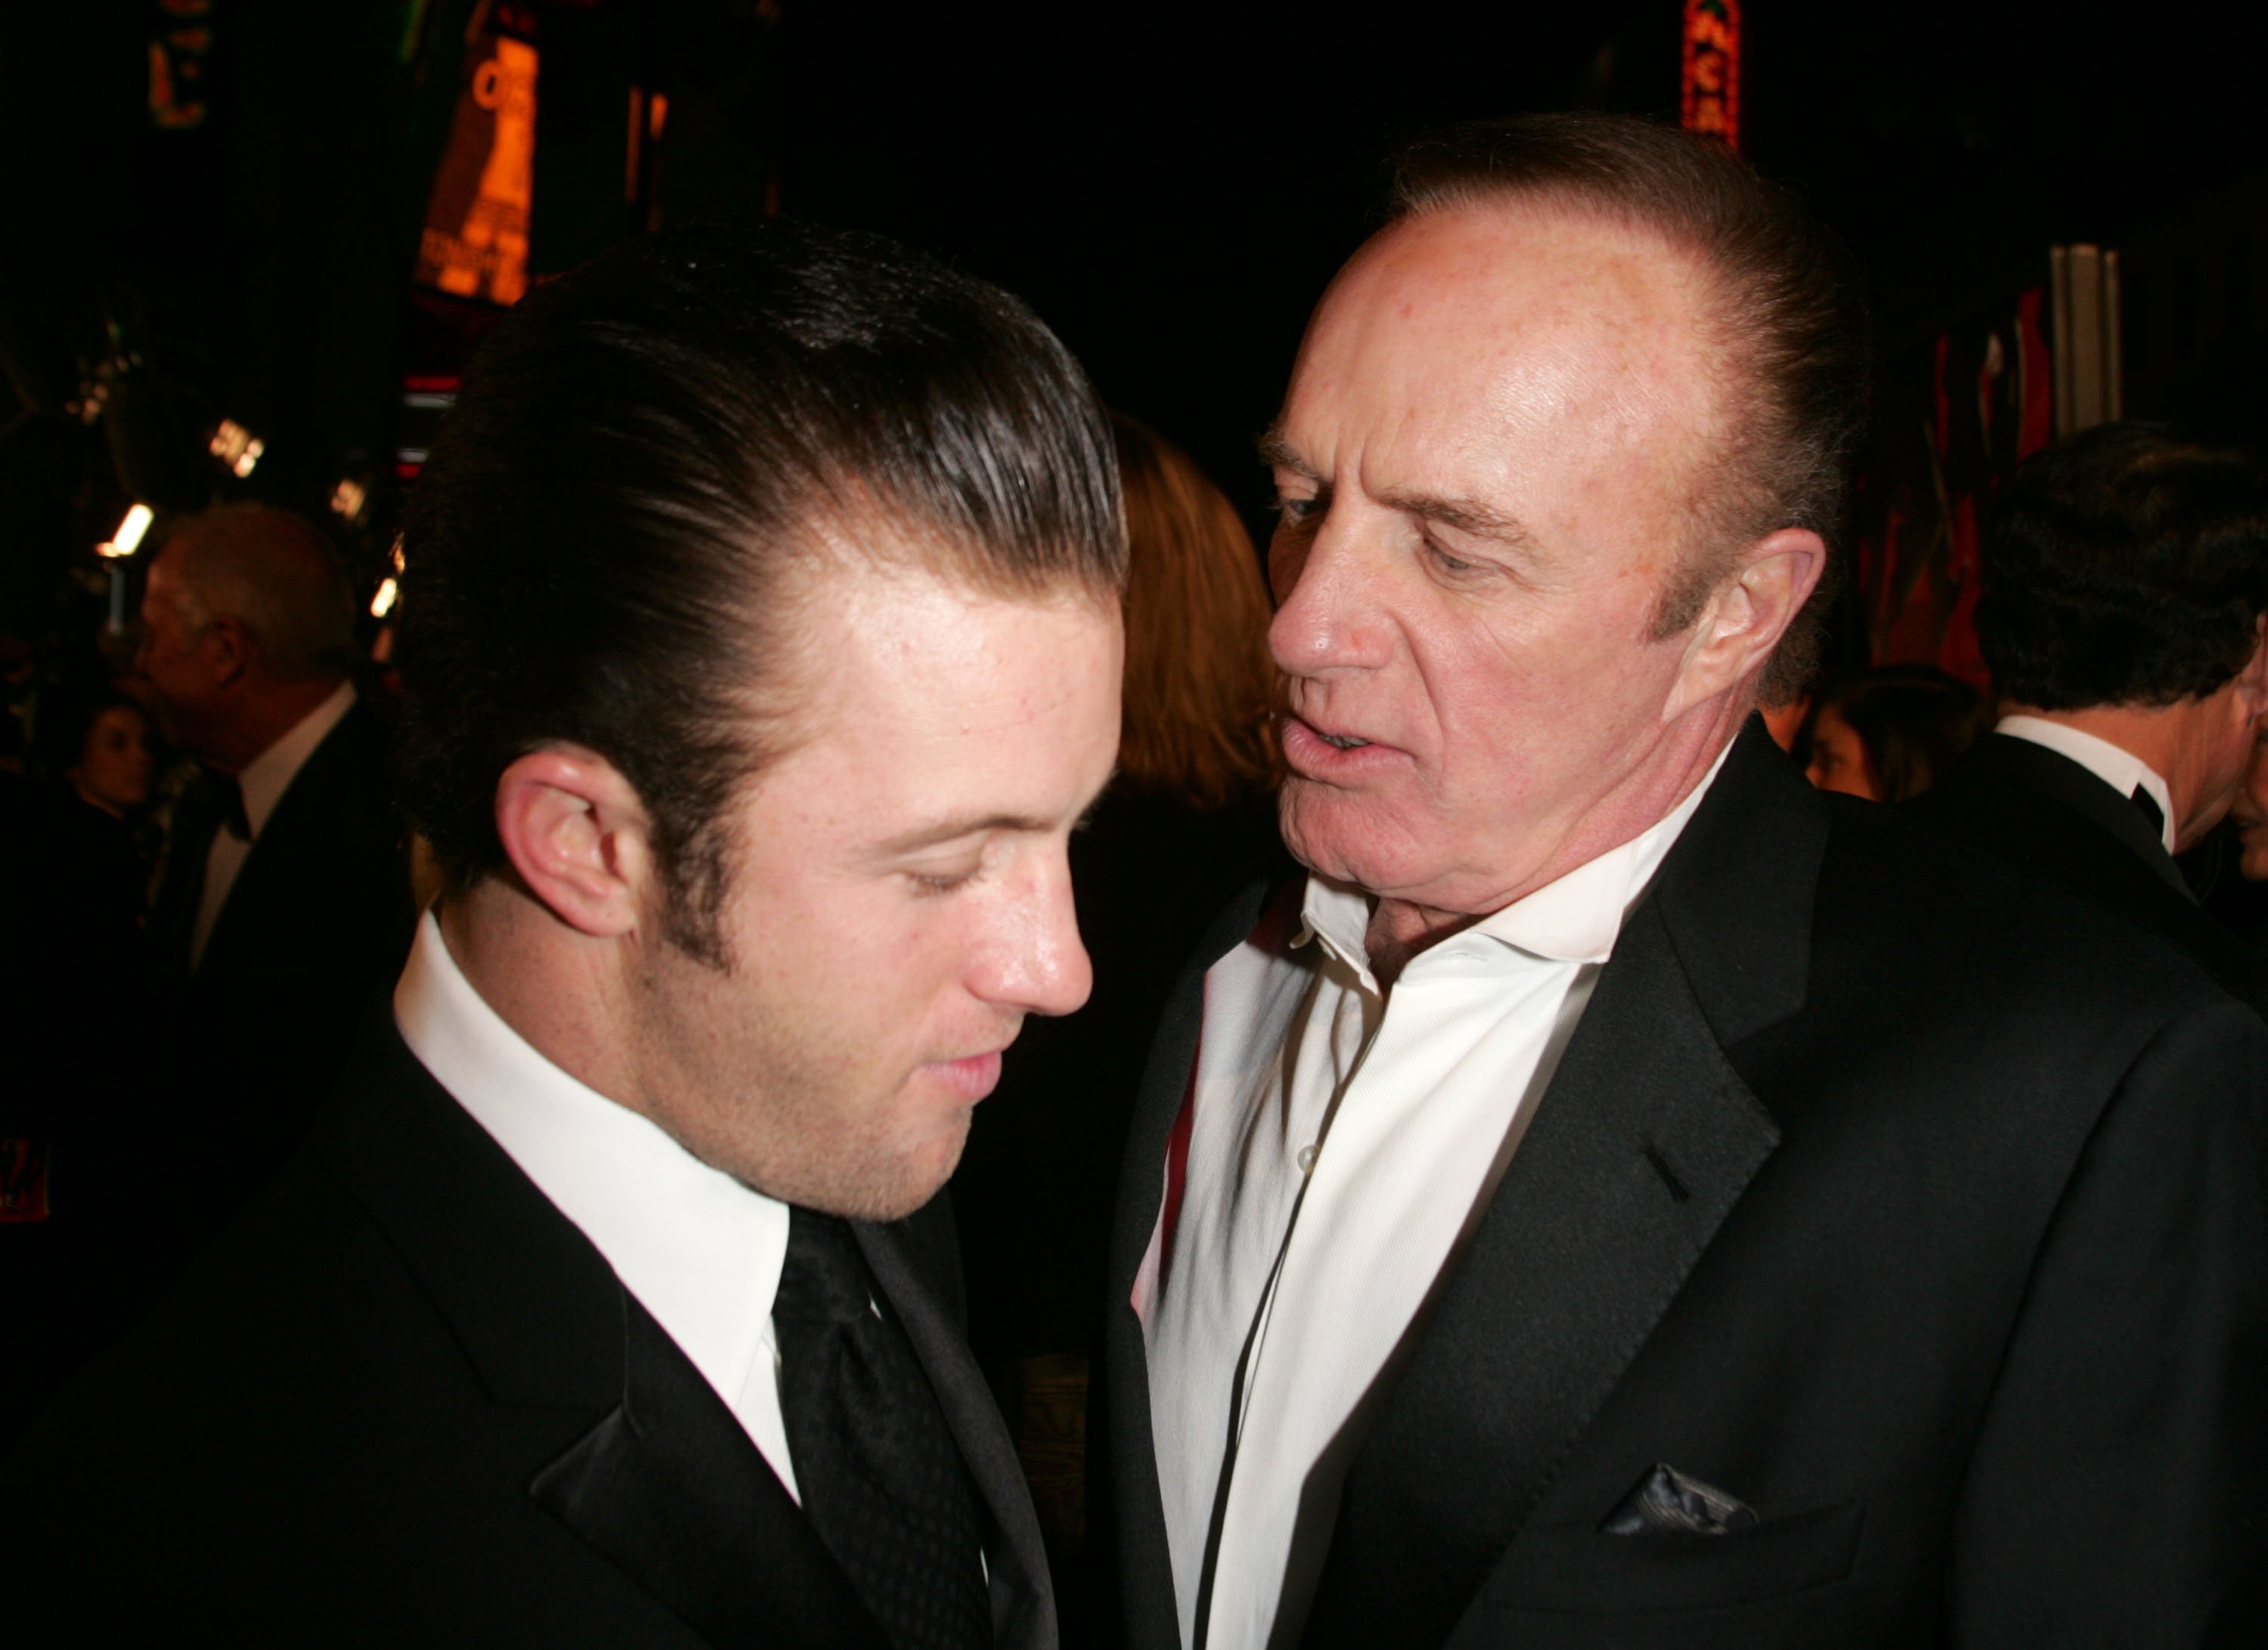 Scott and James Caan at the "Ocean's Twelve" premiere on December 8, 2004, in Hollywood, California. | Source: Getty Images